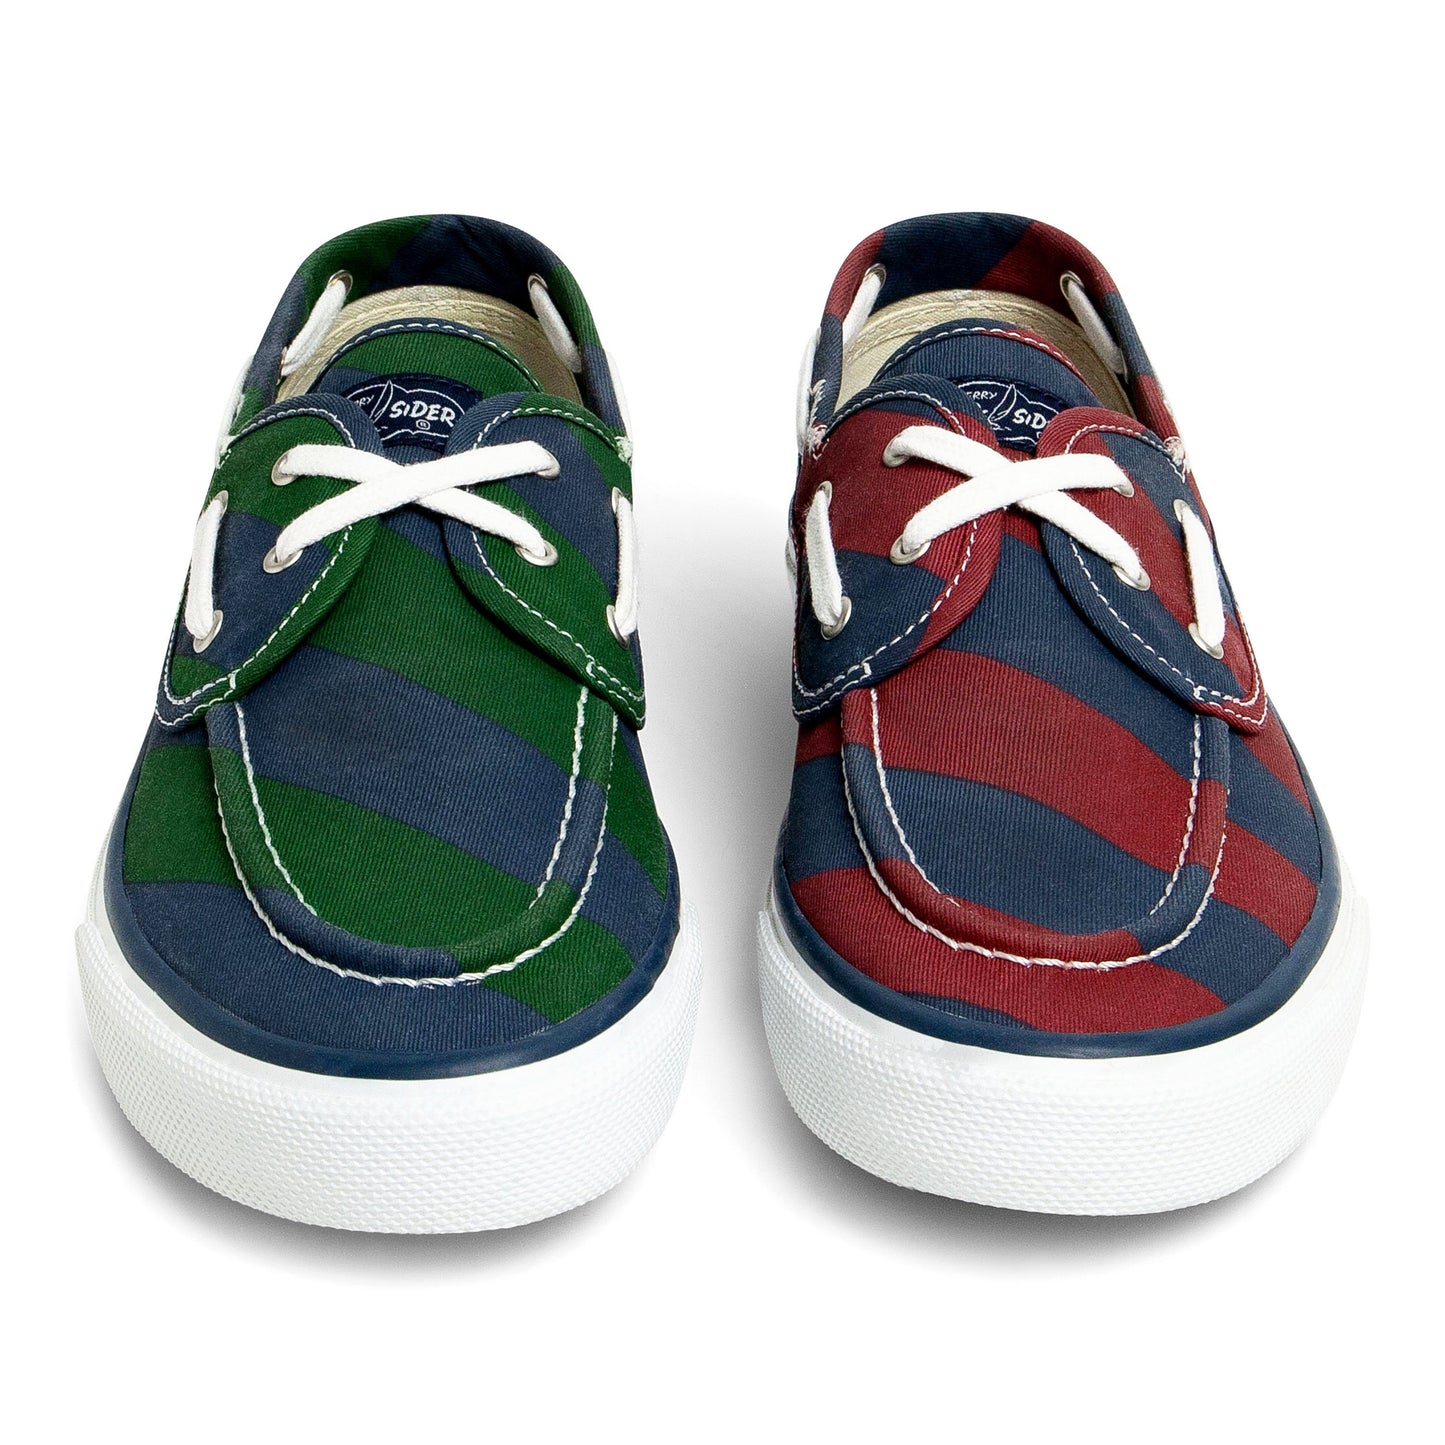 Sperry x Rowing Blazers (Mismatched Rugby Stripe Seamate)